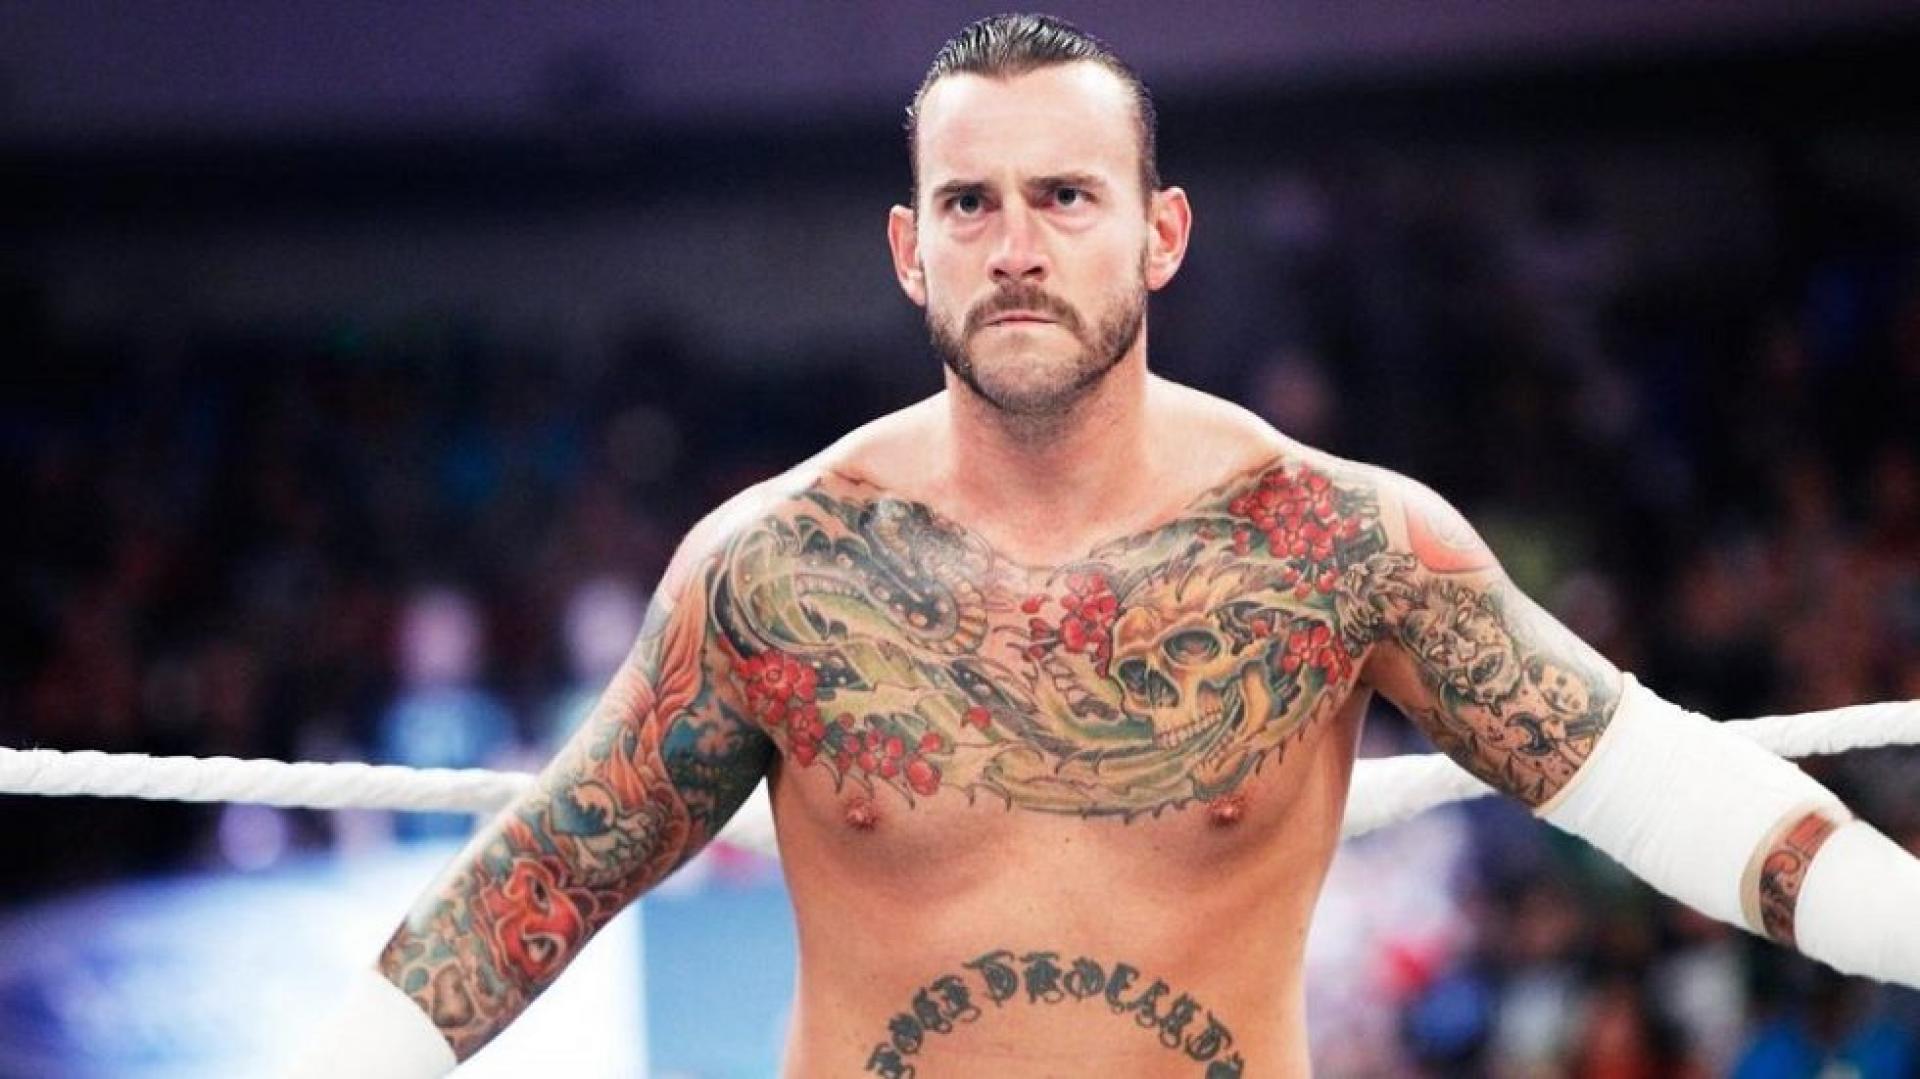 WWE’s TV Network Partners Are Said To Be Shocked About CM Punk Signing